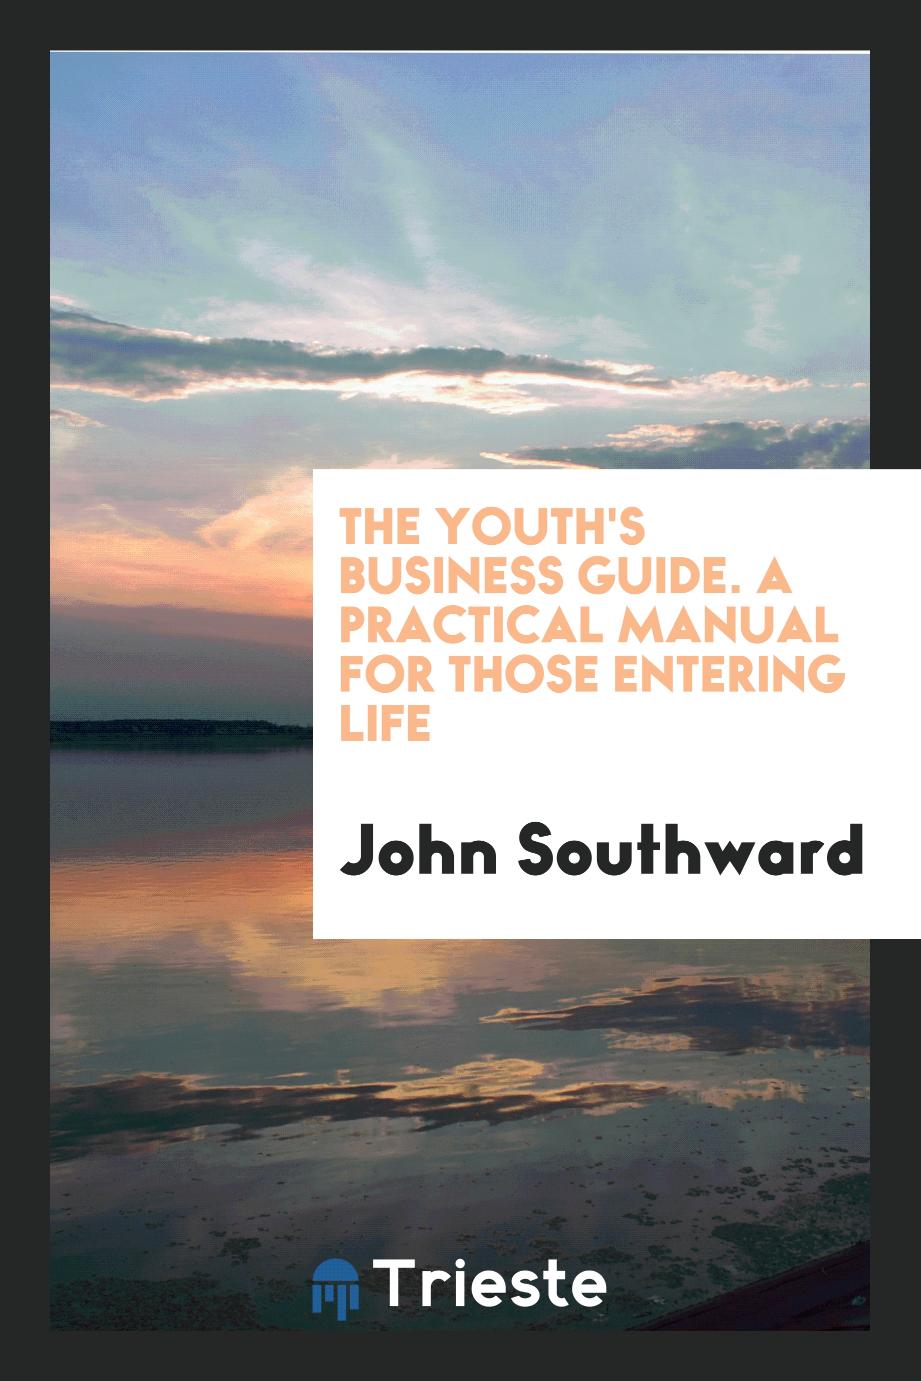 The Youth's Business Guide. A Practical Manual for Those Entering Life